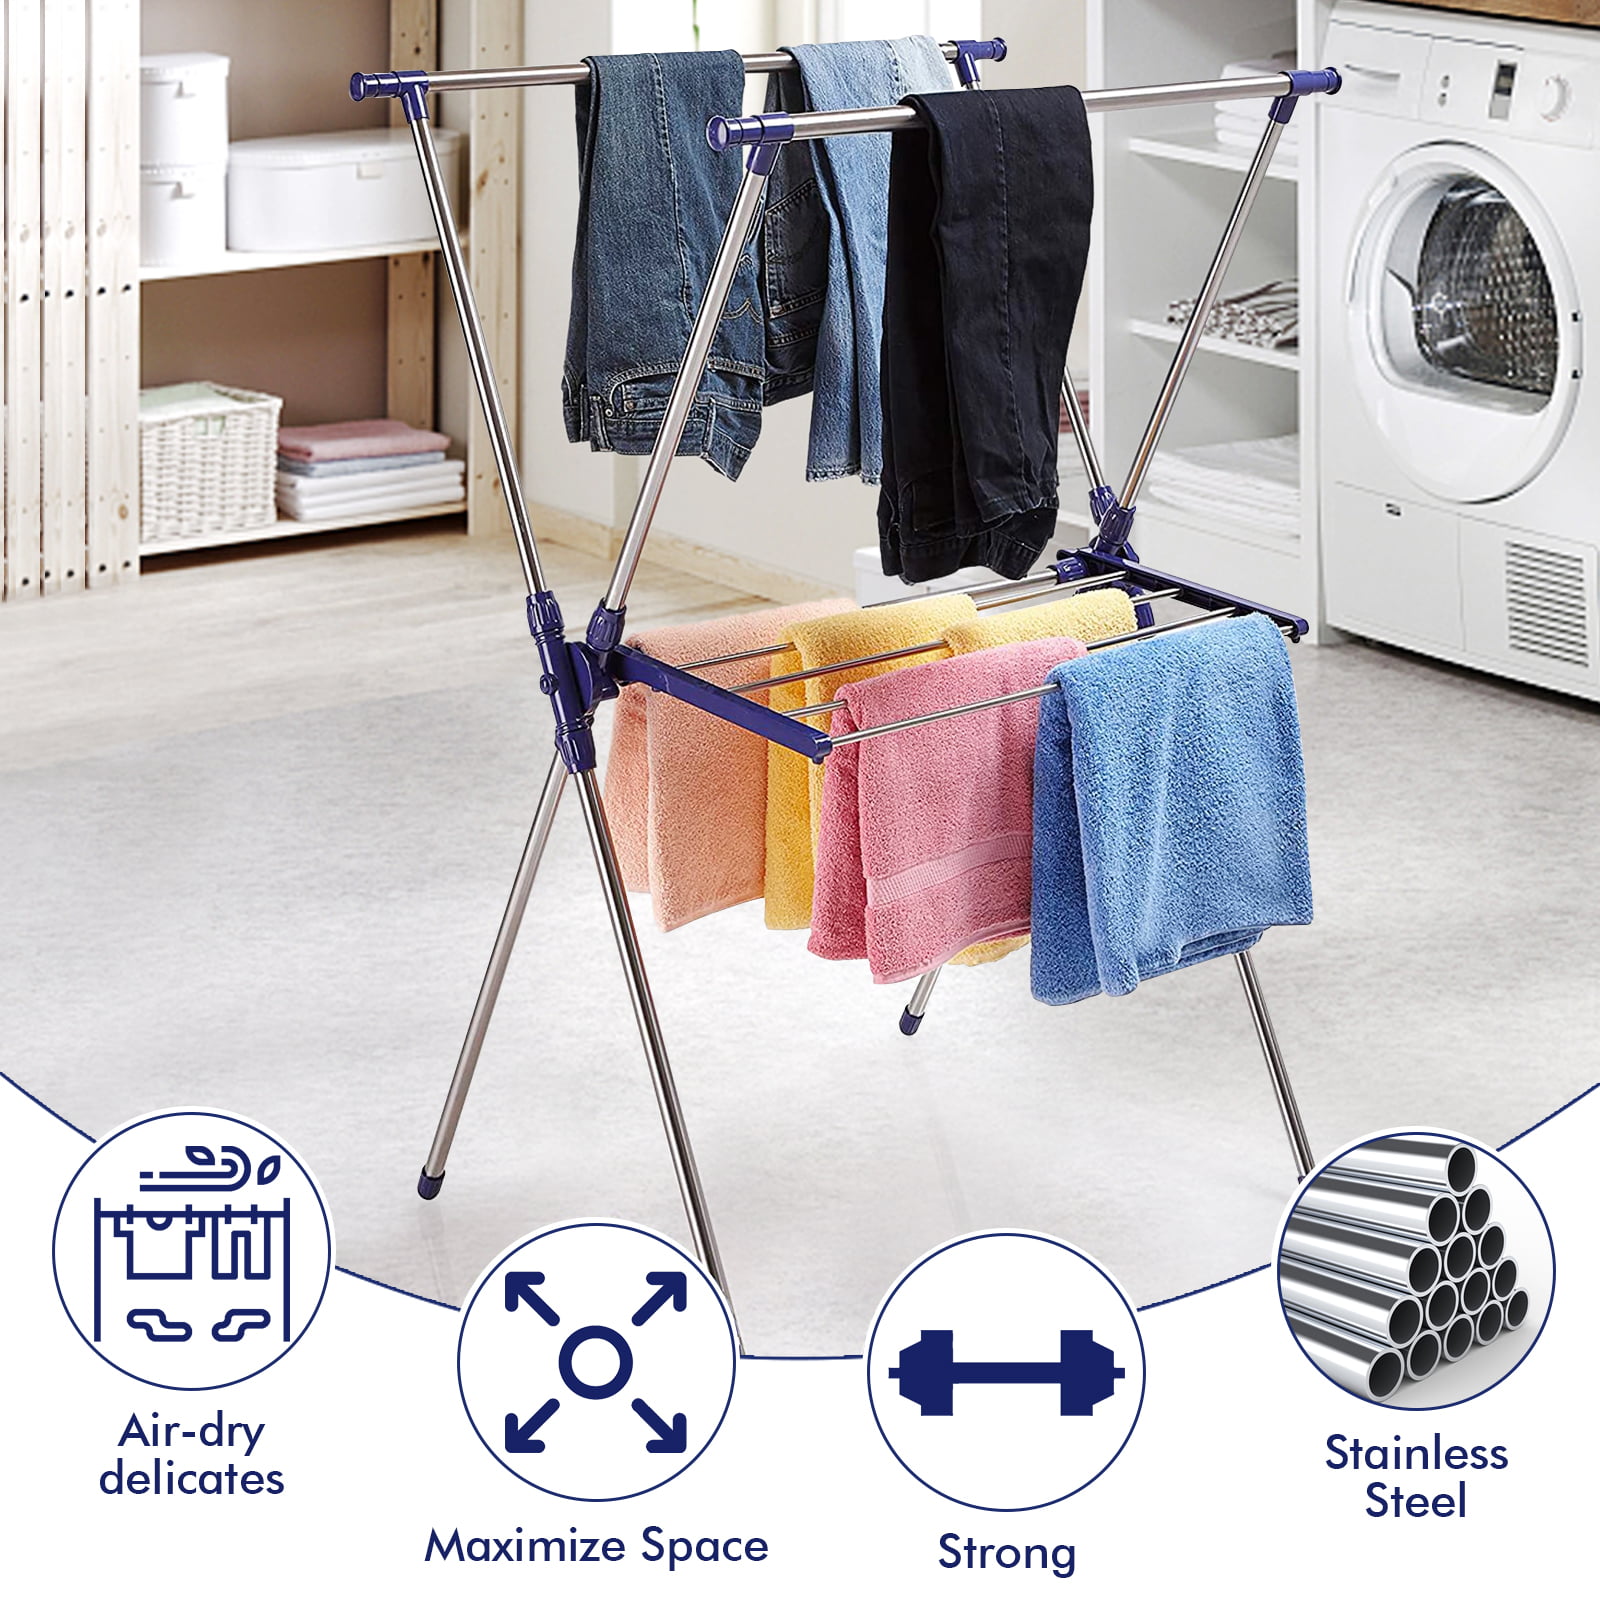 Manatee Clothes Dryer Portable Drying Rack for Laundry 1200W - 33